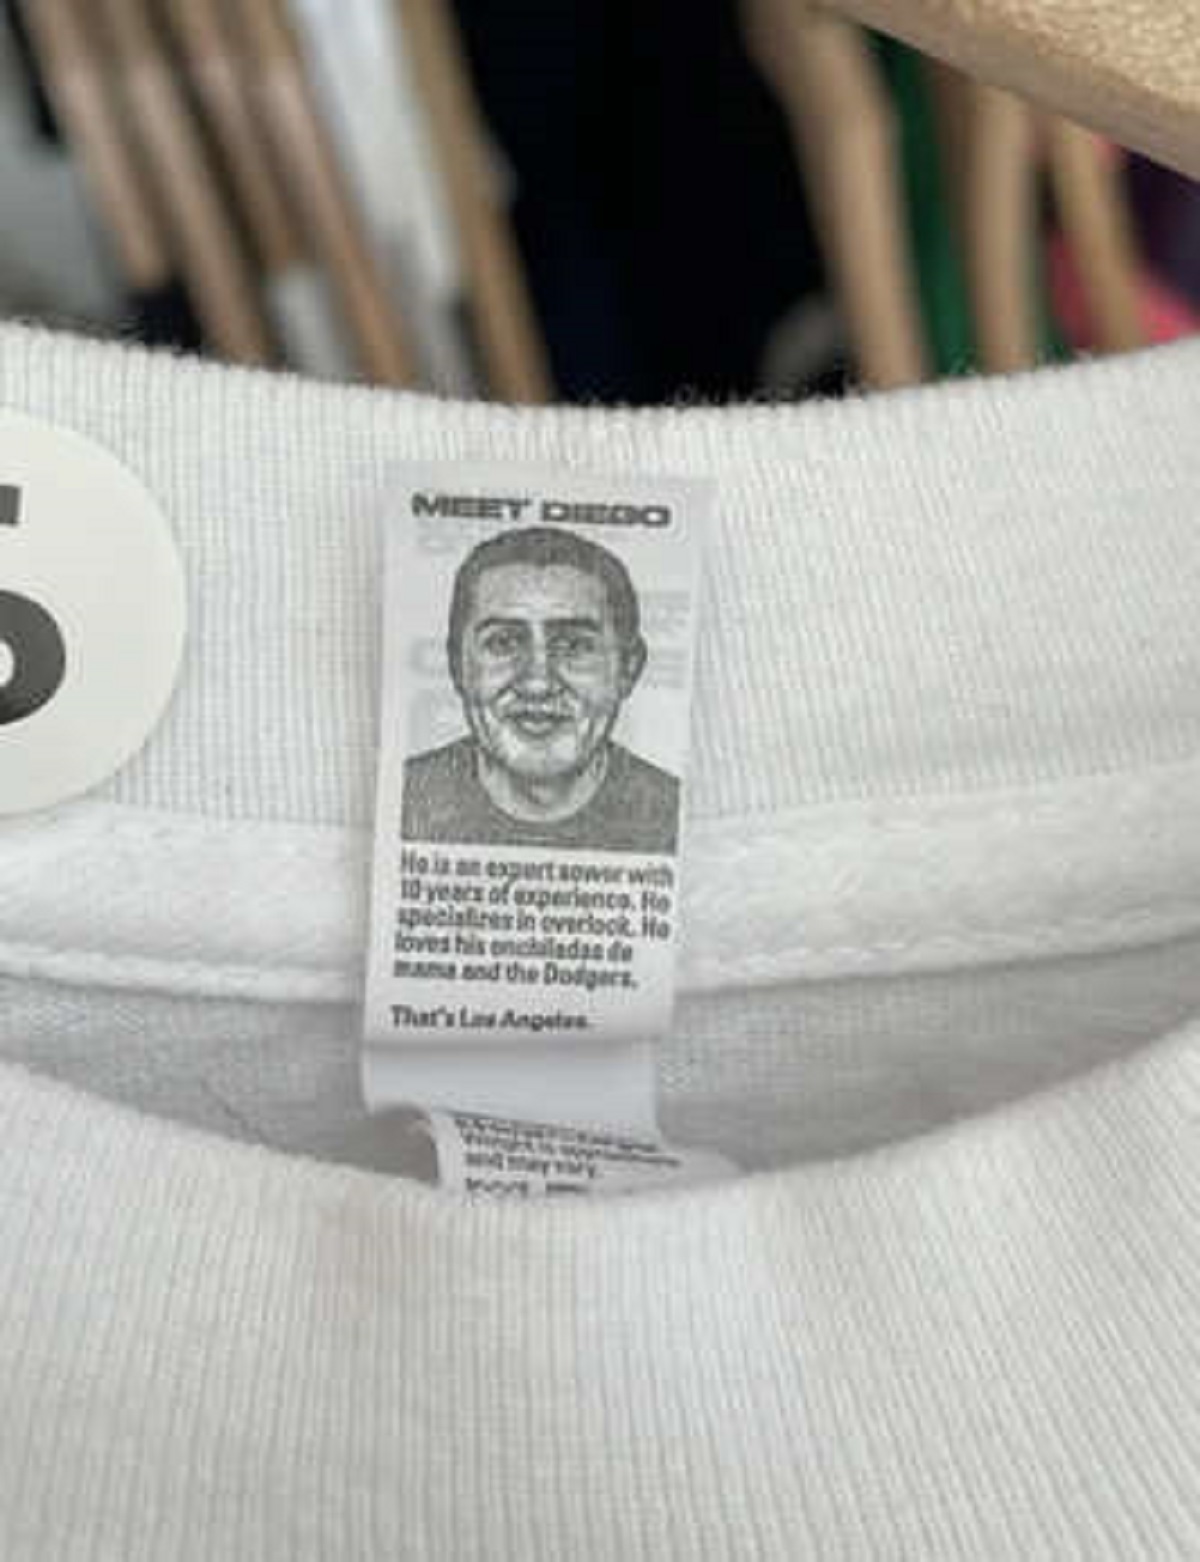 You knew who you were paying? T-shirt company puts a picture of the person who made it on the tag.